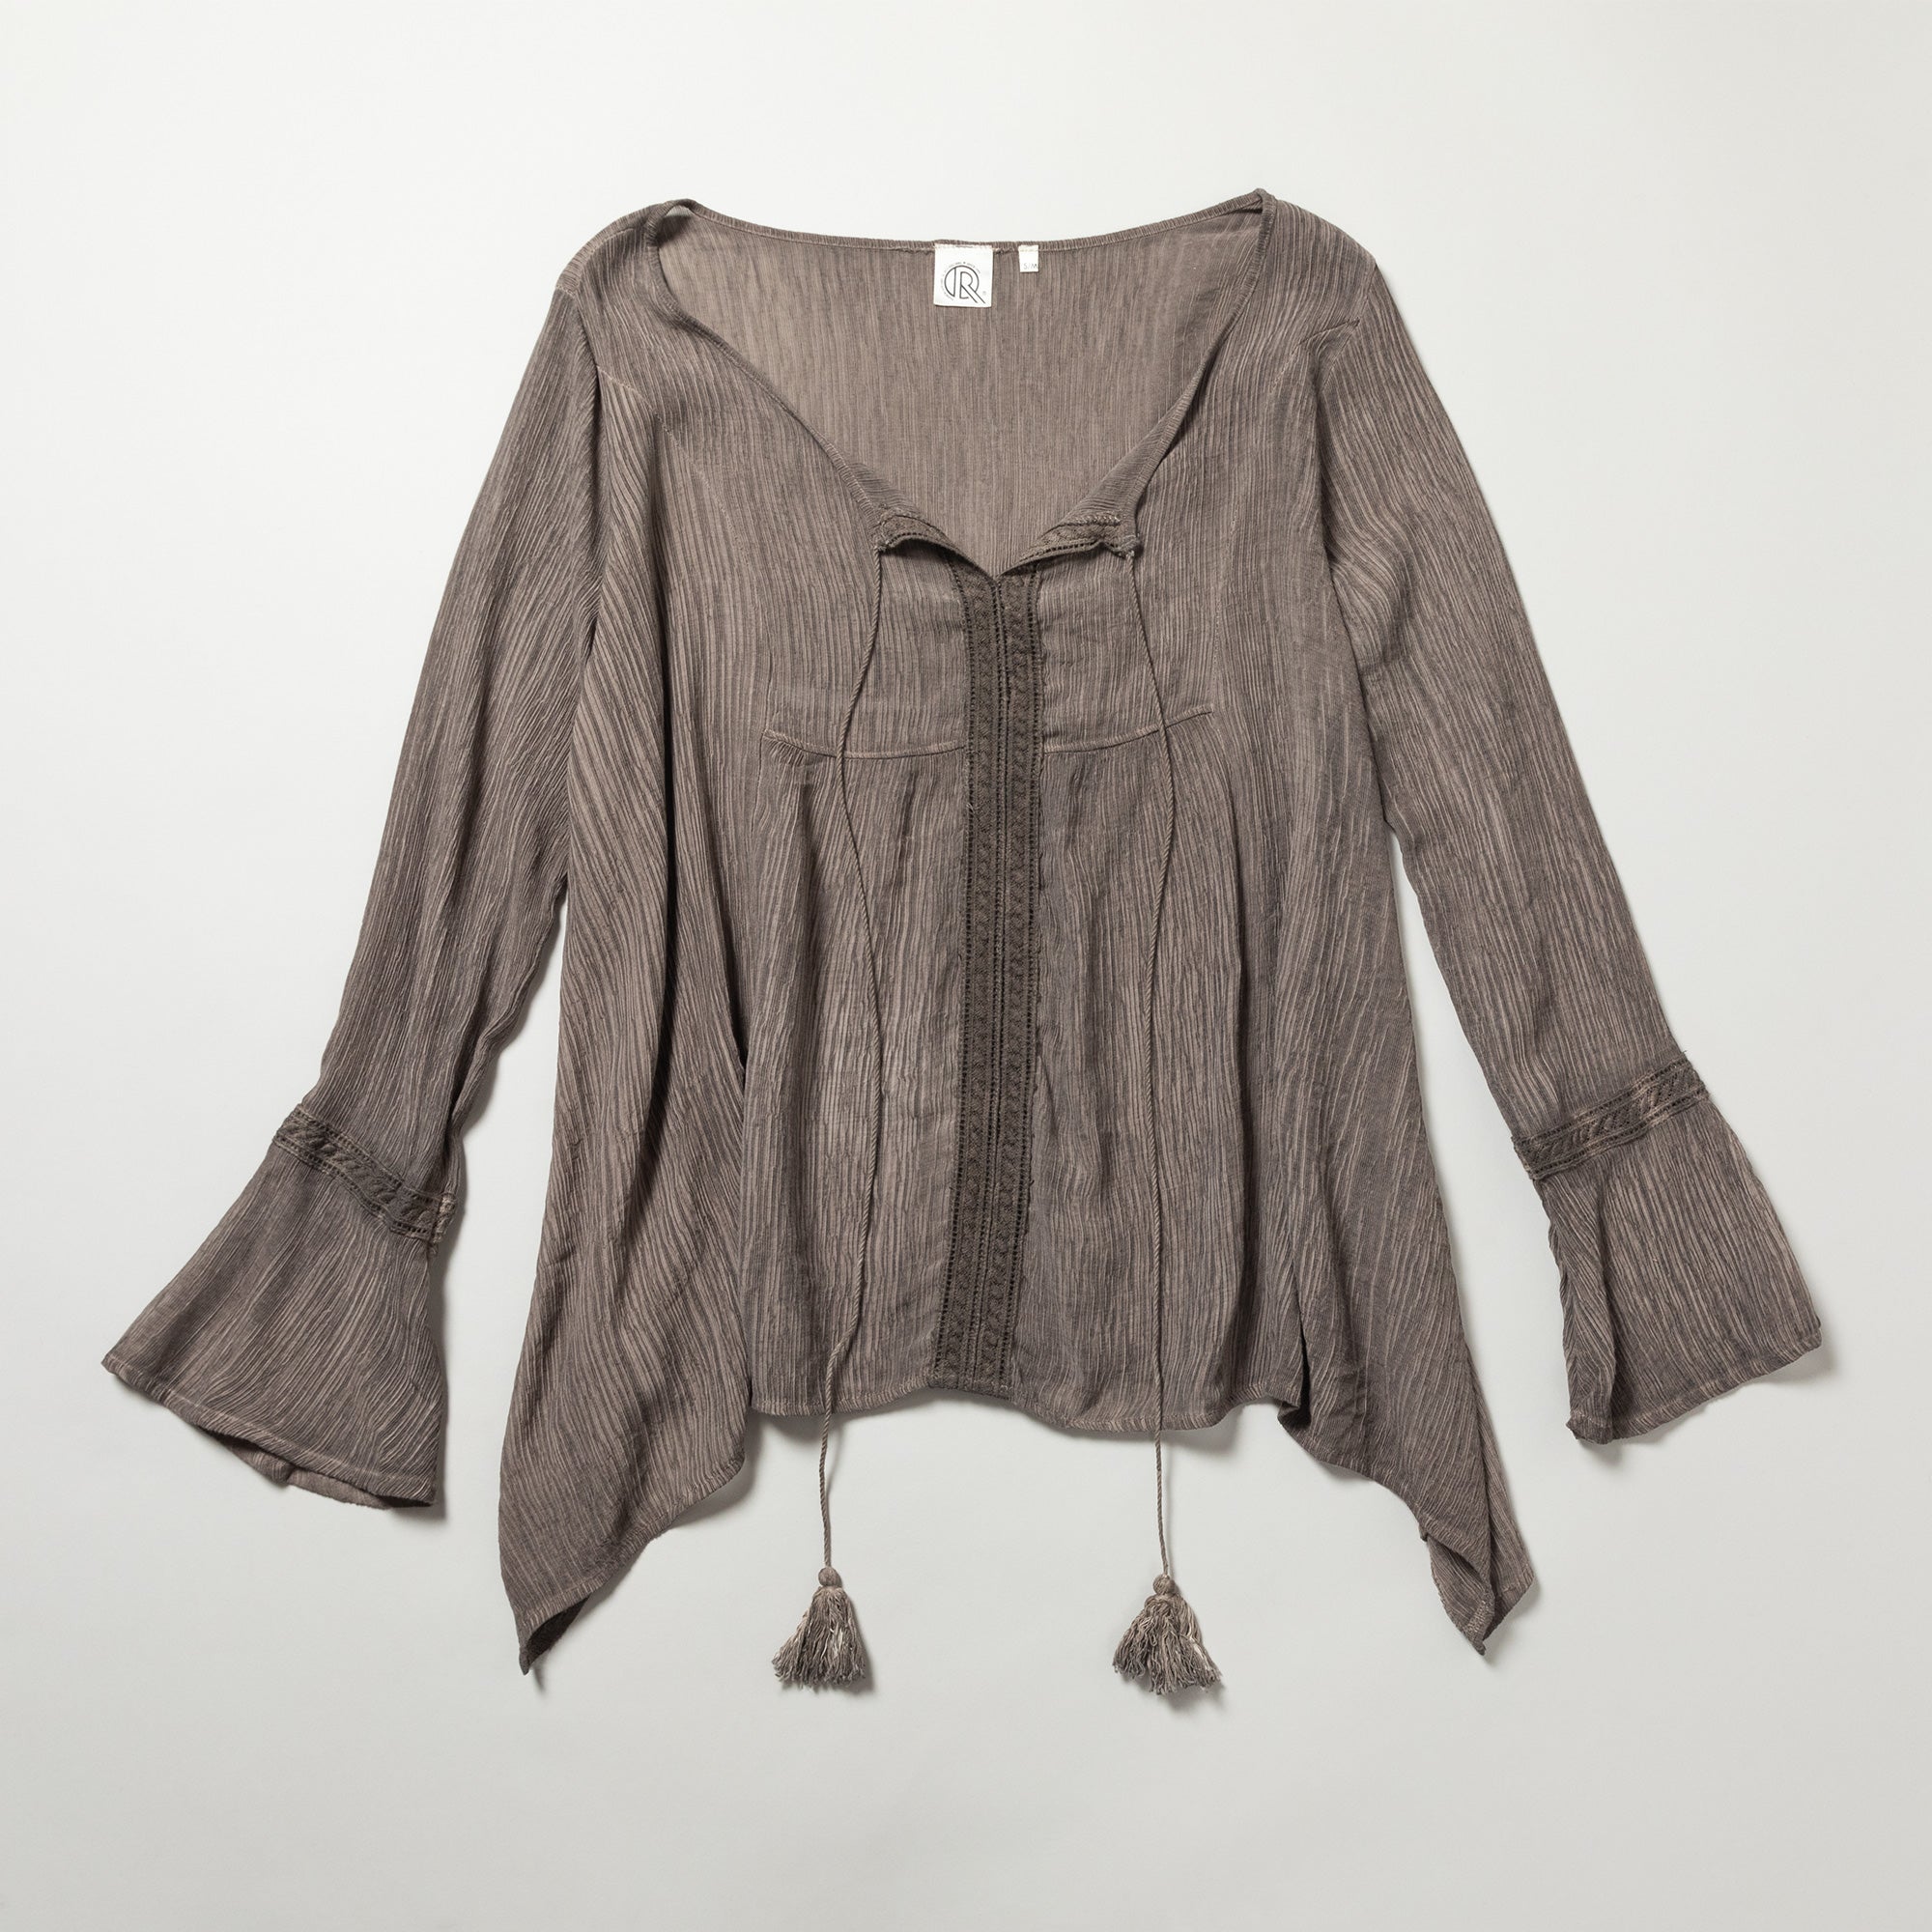 All In The Details Long Bell Sleeve Top - Khaki - S/M